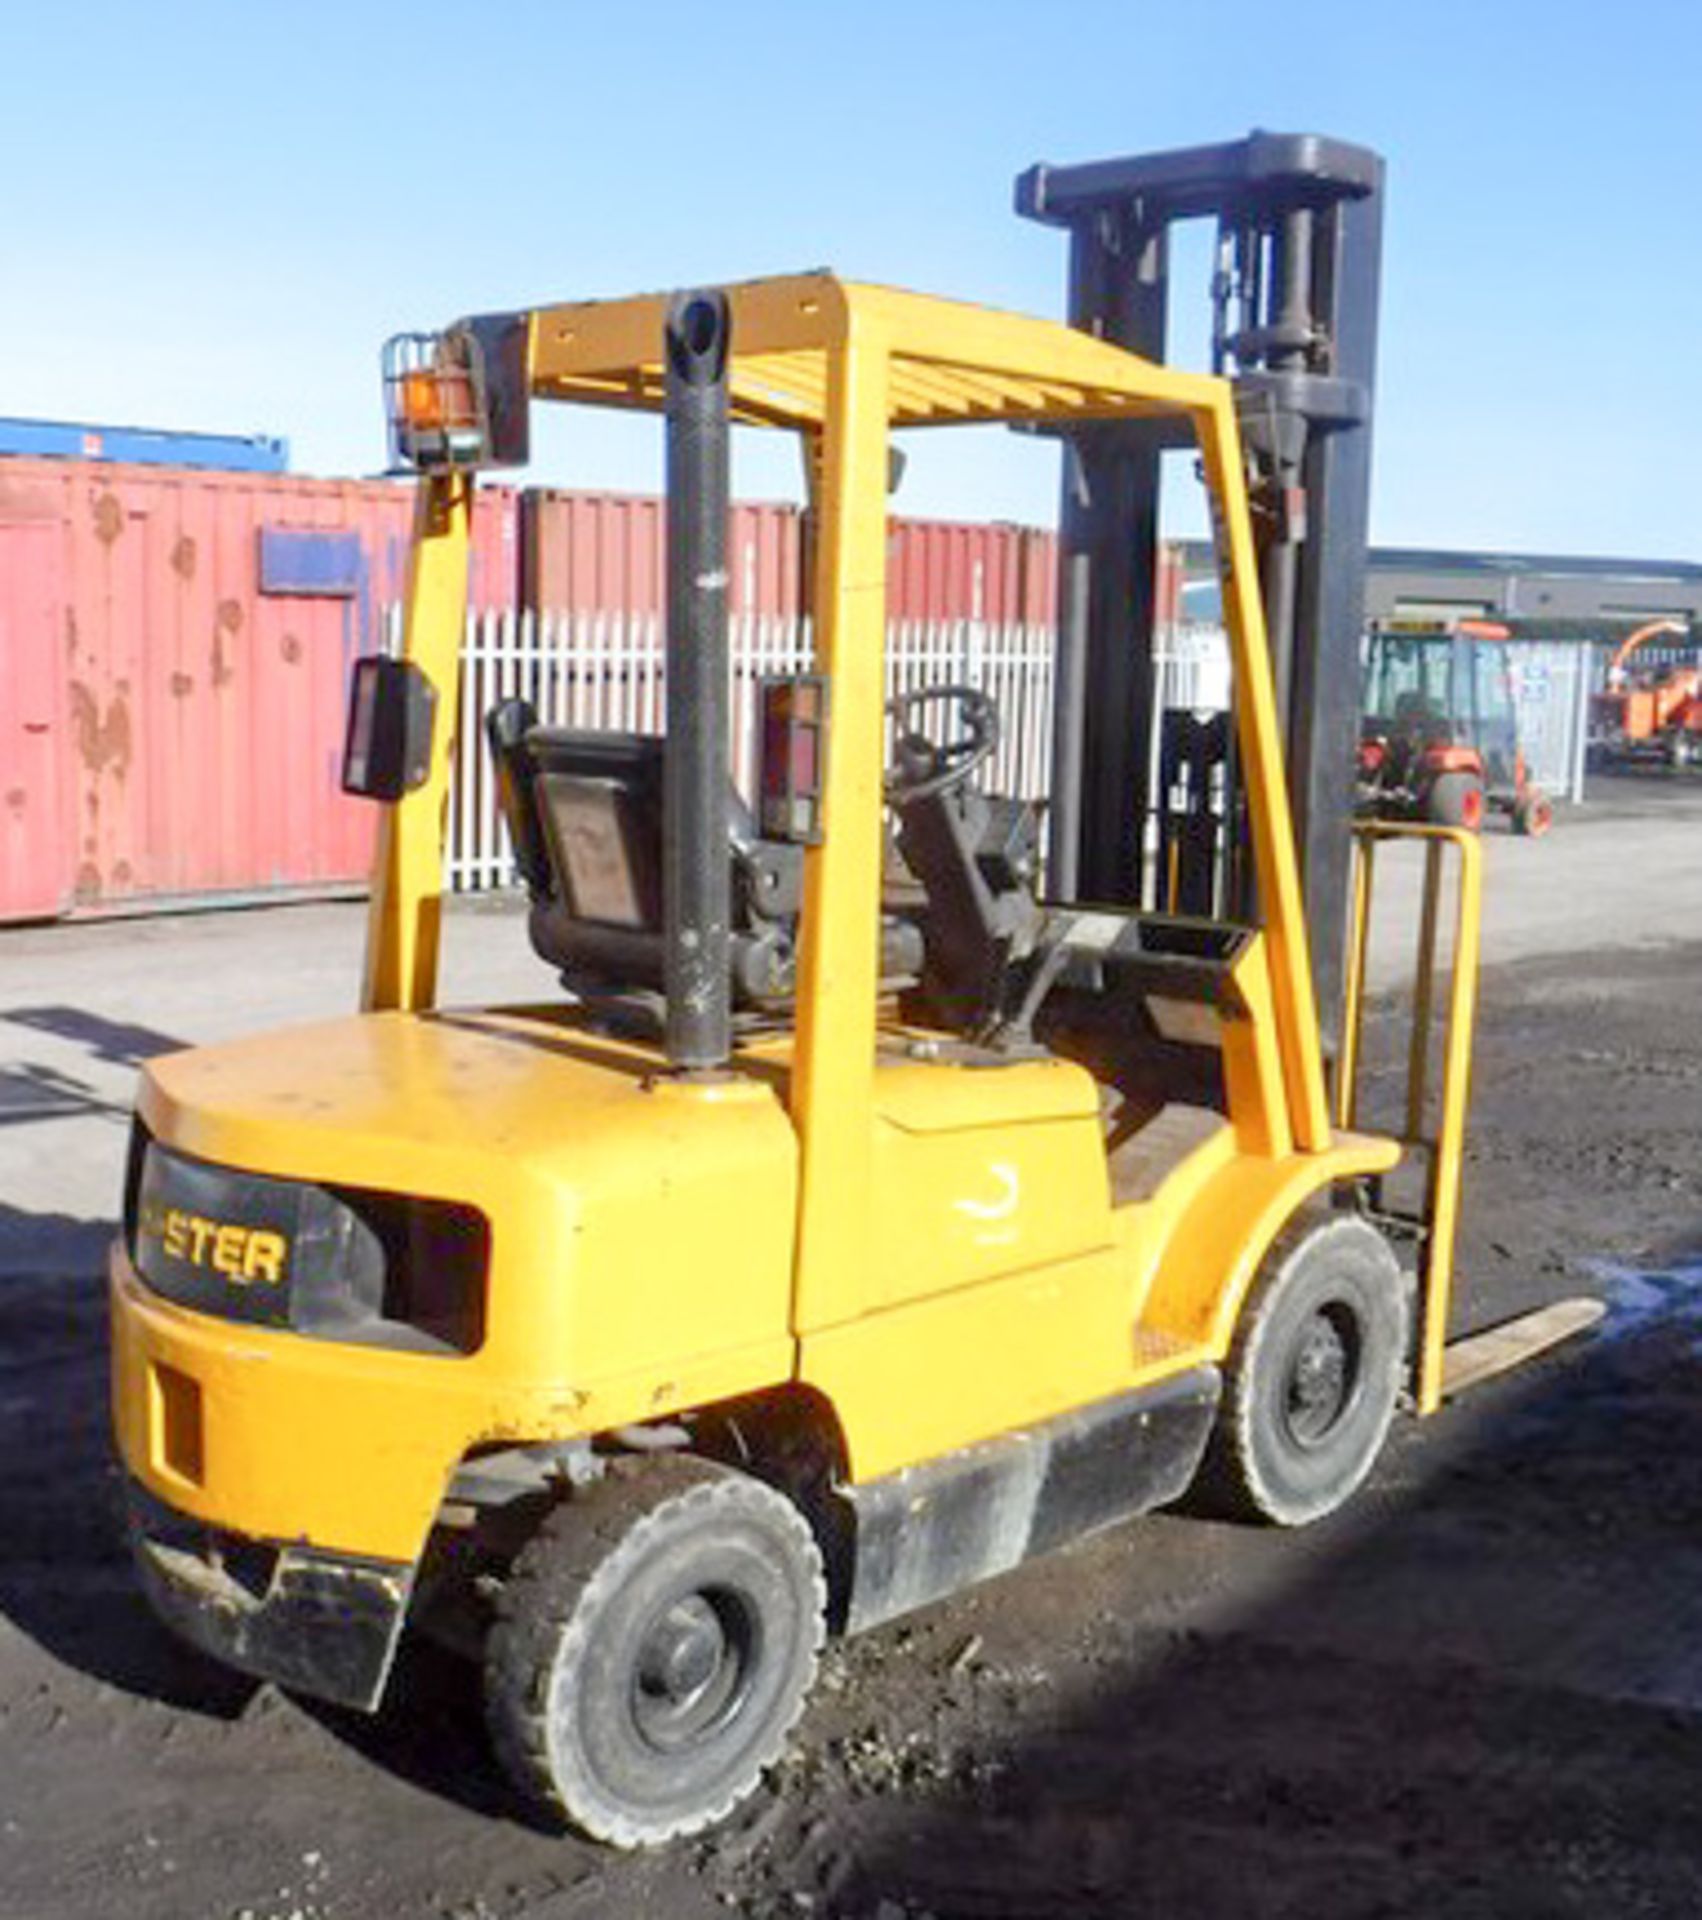 2002 HYSTER H2.50XM DIESEL FORKLIFT. SN H177B327392. 6068 HRS (NOT VERIFIED) - Image 9 of 13